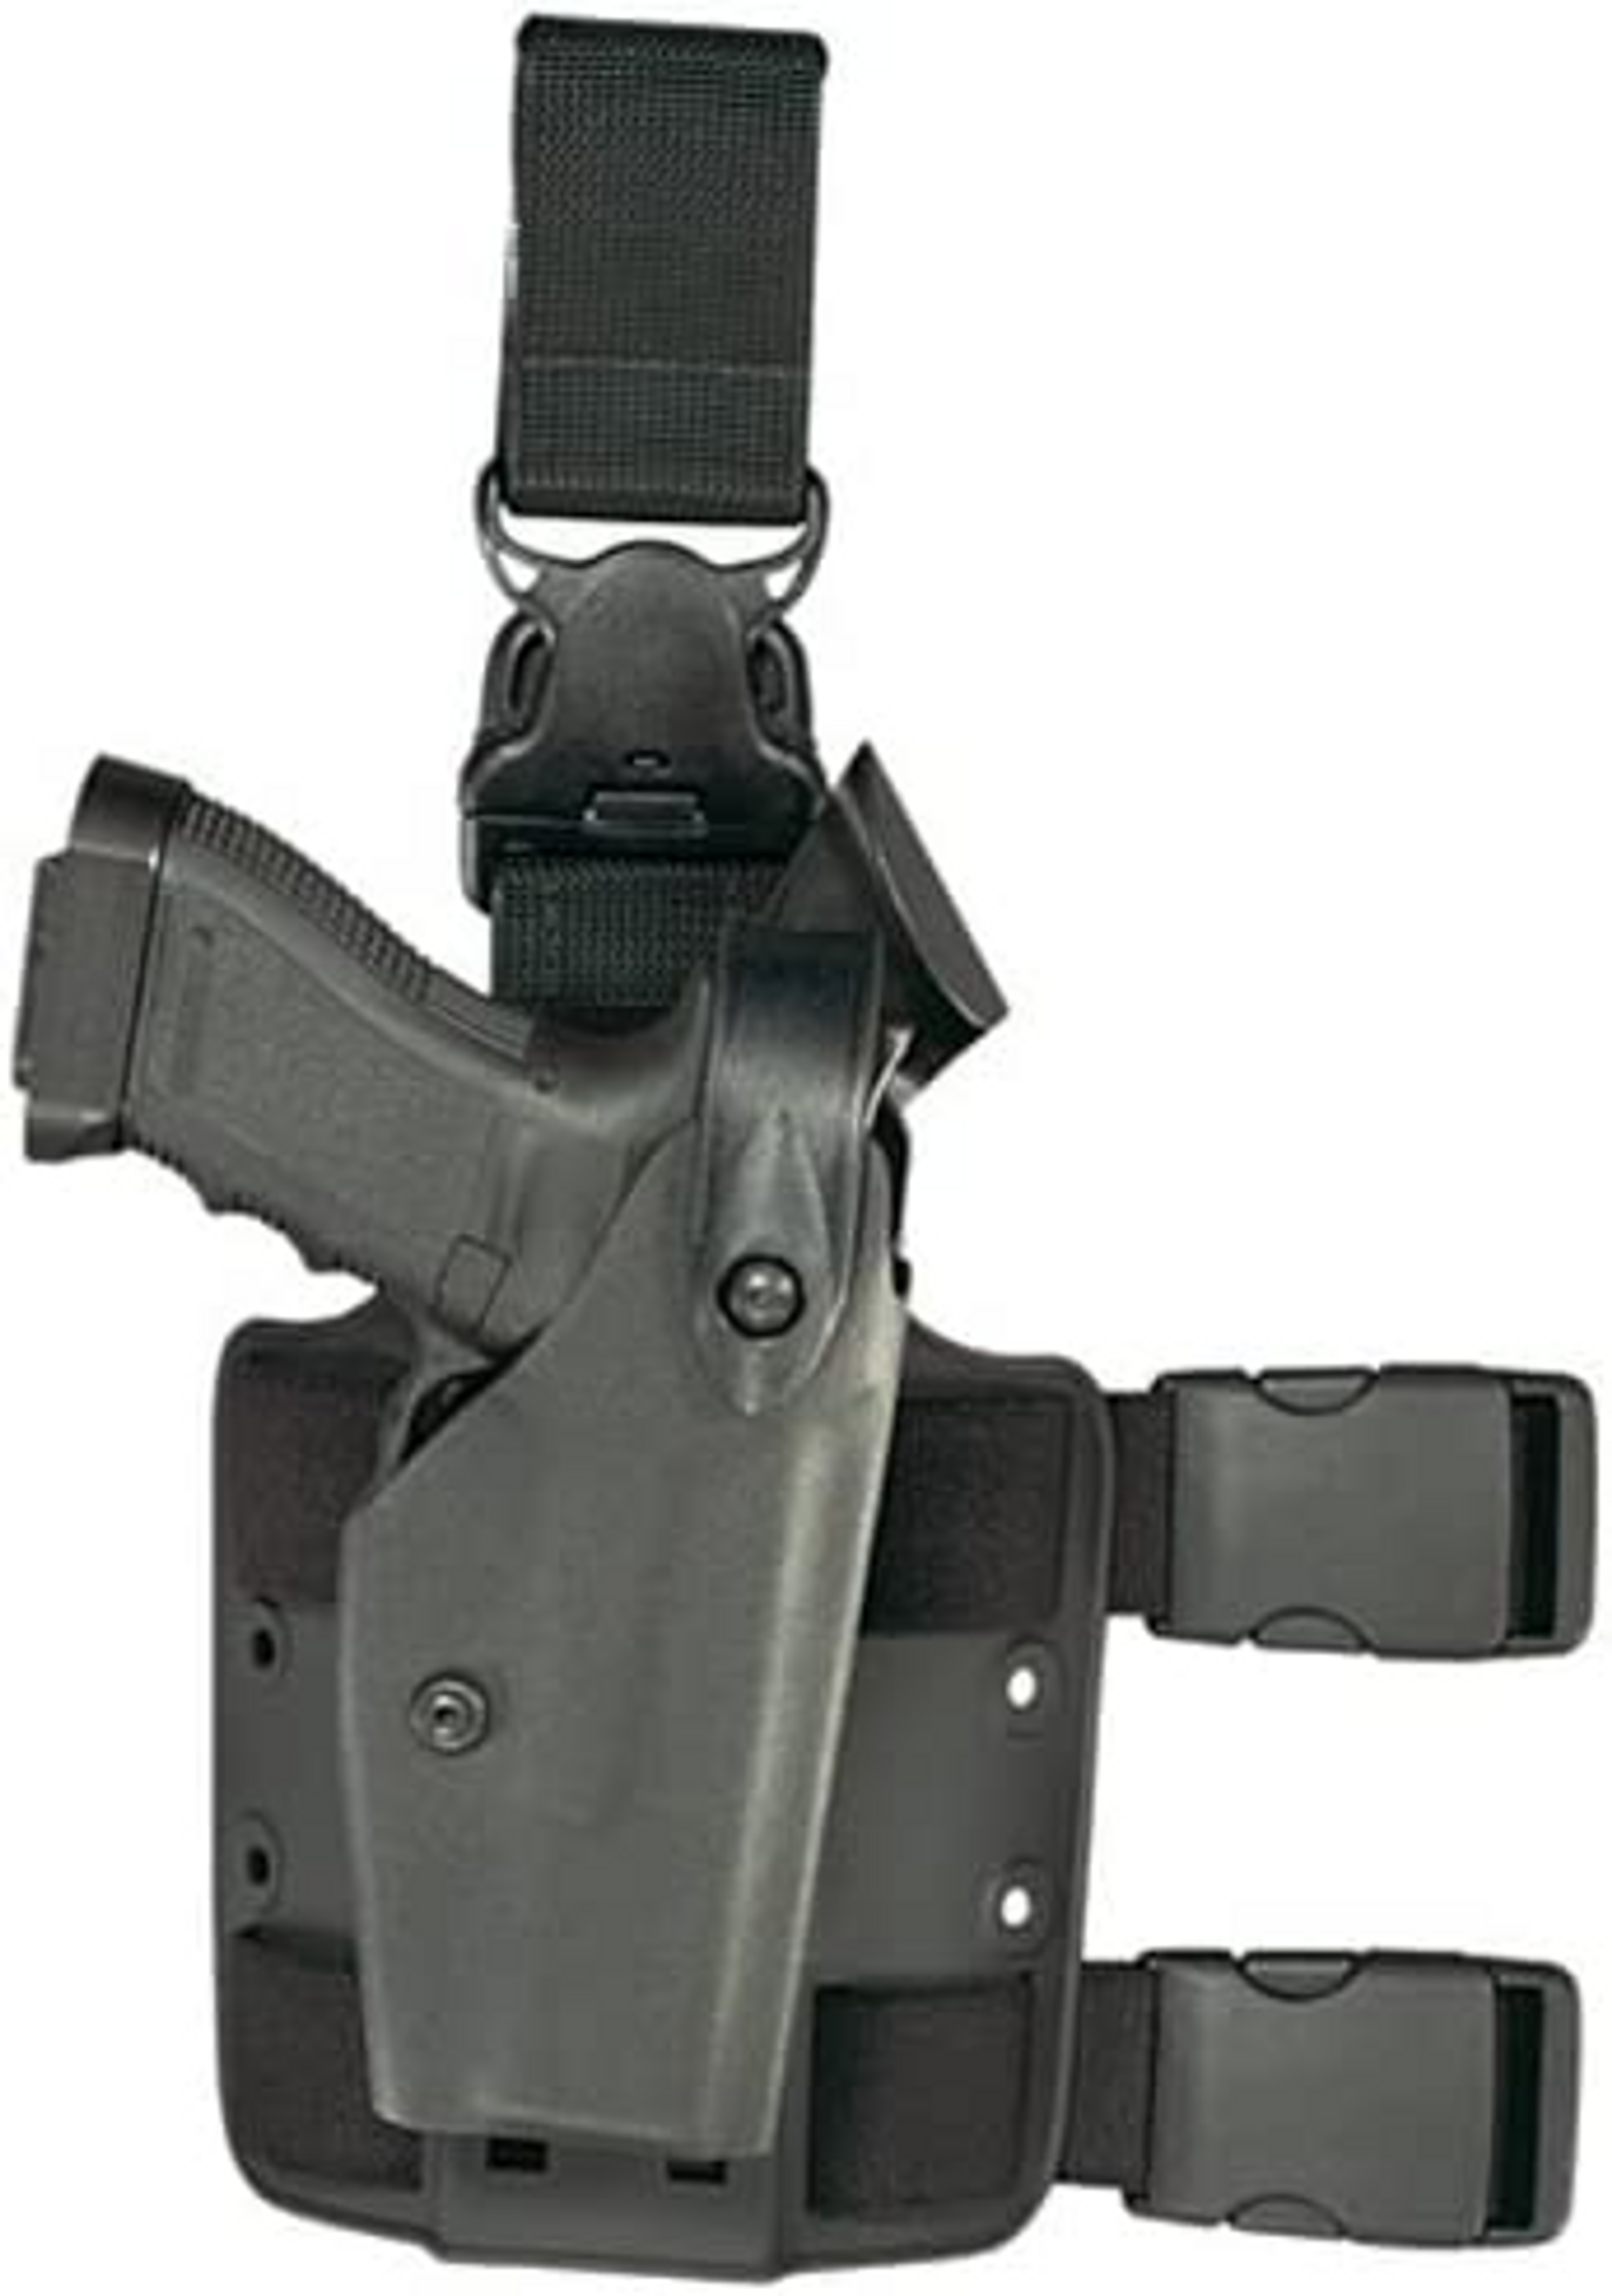 Model 6005 Sls Tactical Holster With Quick-release Leg Strap For Glock 19 W/ Iti Light